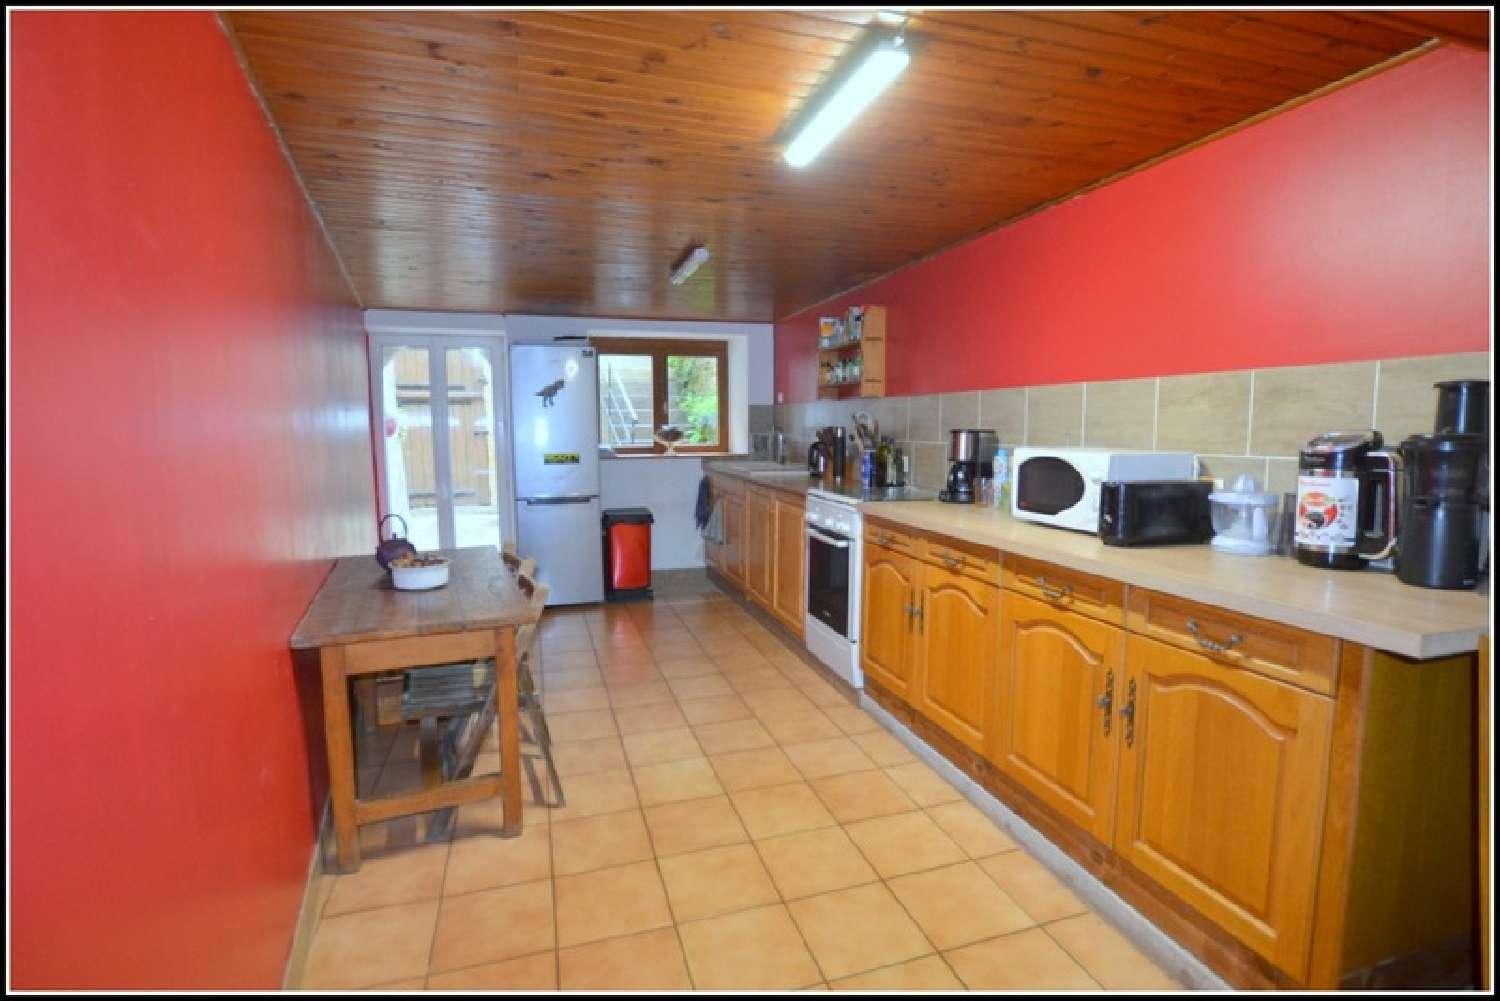  for sale village house Gorze Moselle 5